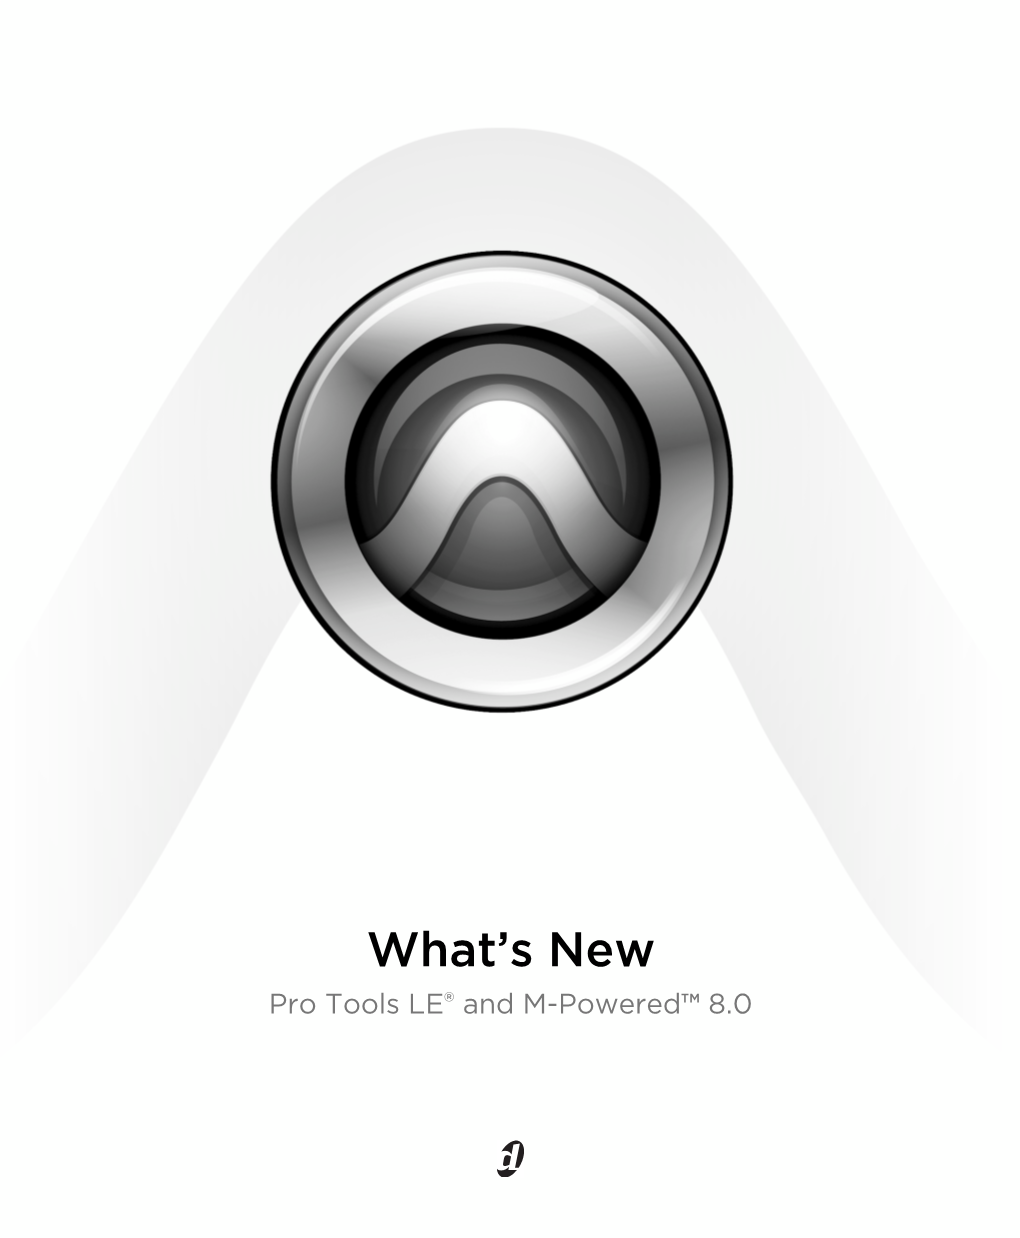 What's New in Pro Tools LE and M-Powered